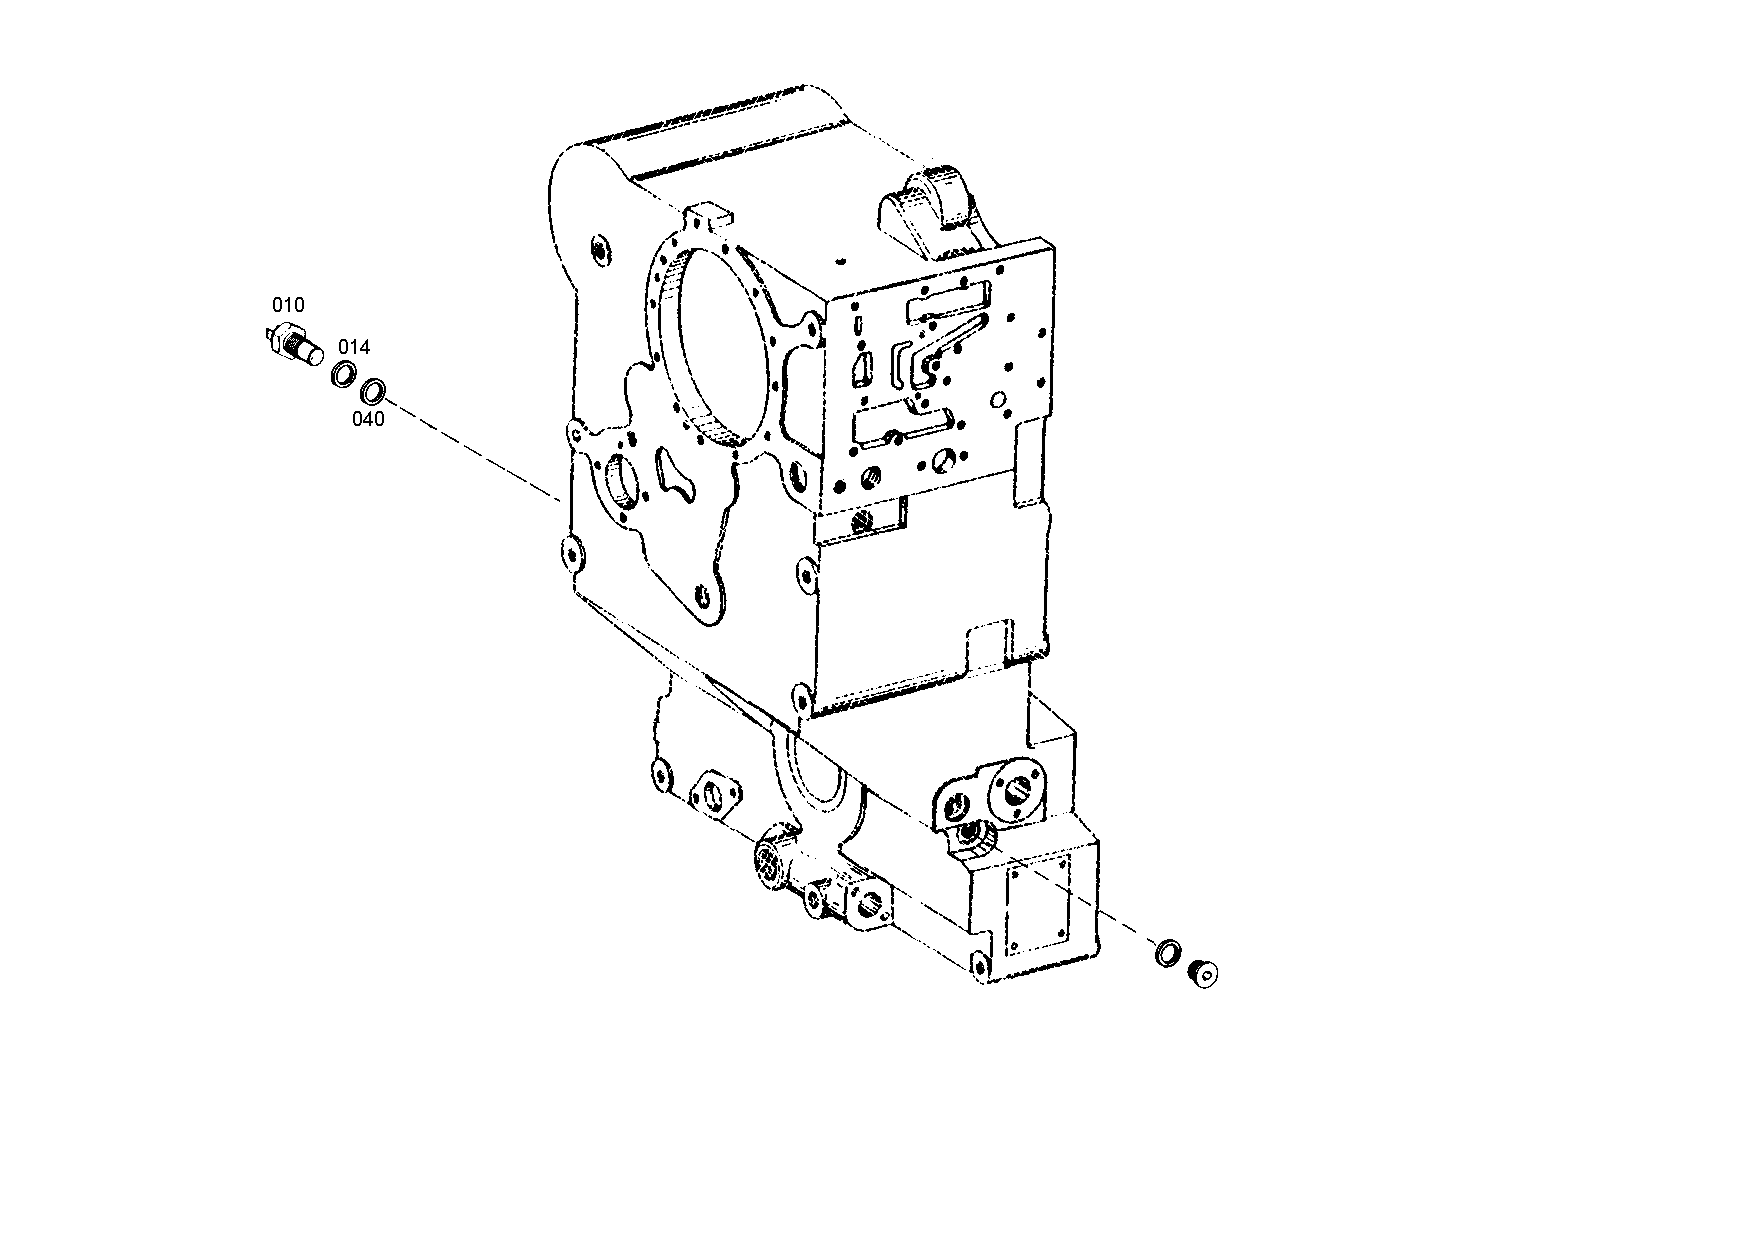 drawing for NOELL GMBH 0051591862 - INDUCTIVE TRANSMITTER (figure 2)